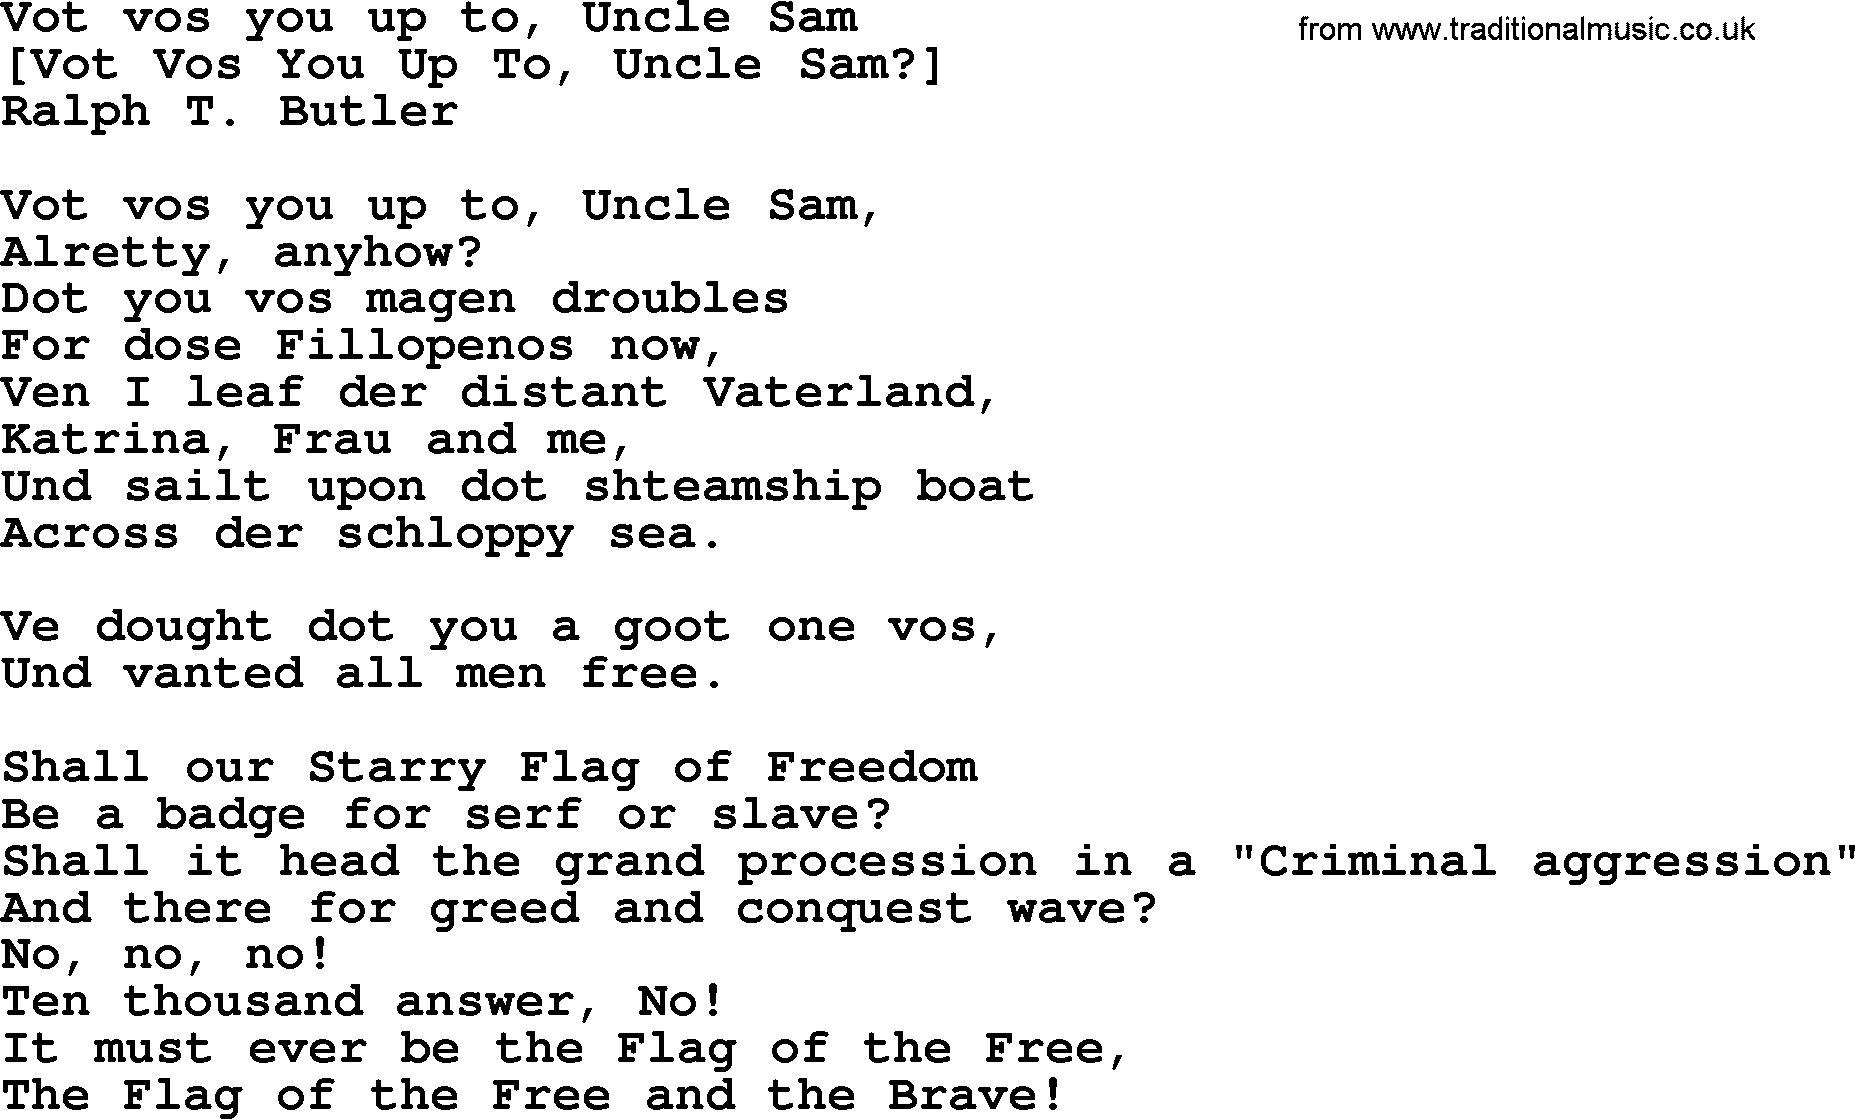 Old American Song: Vot Vos You Up To, Uncle Sam, lyrics